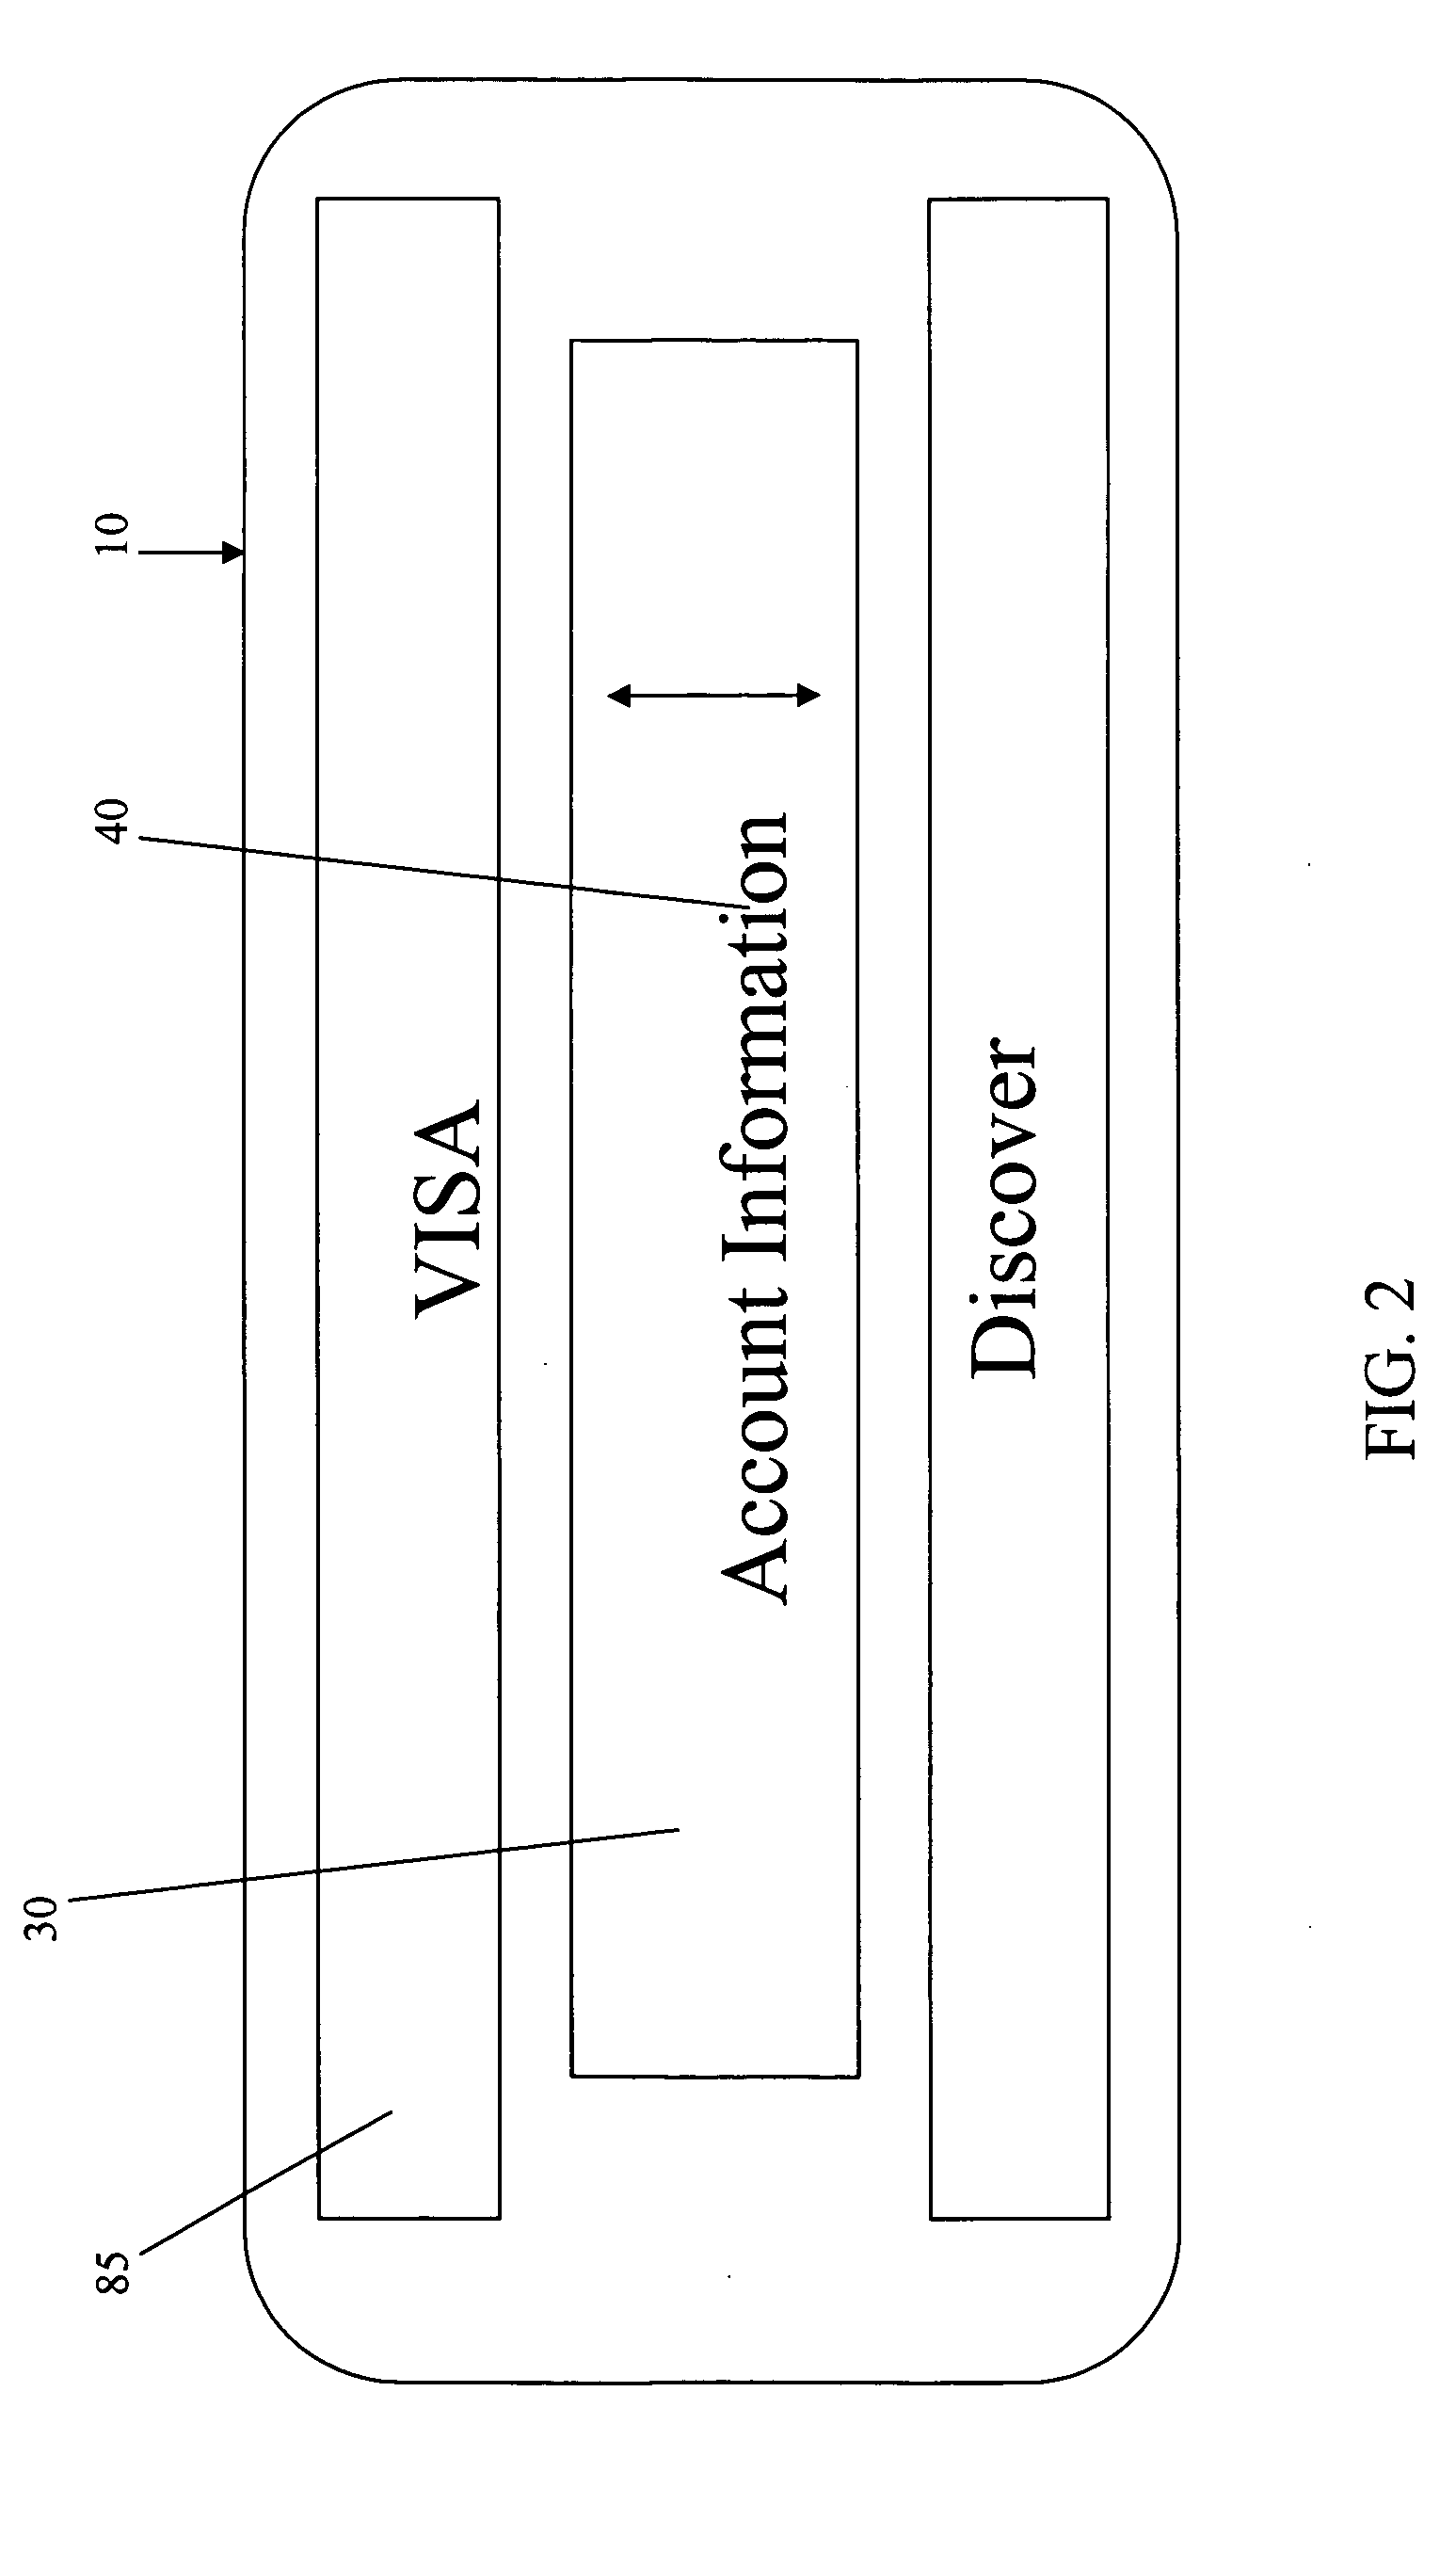 Authorization system and method